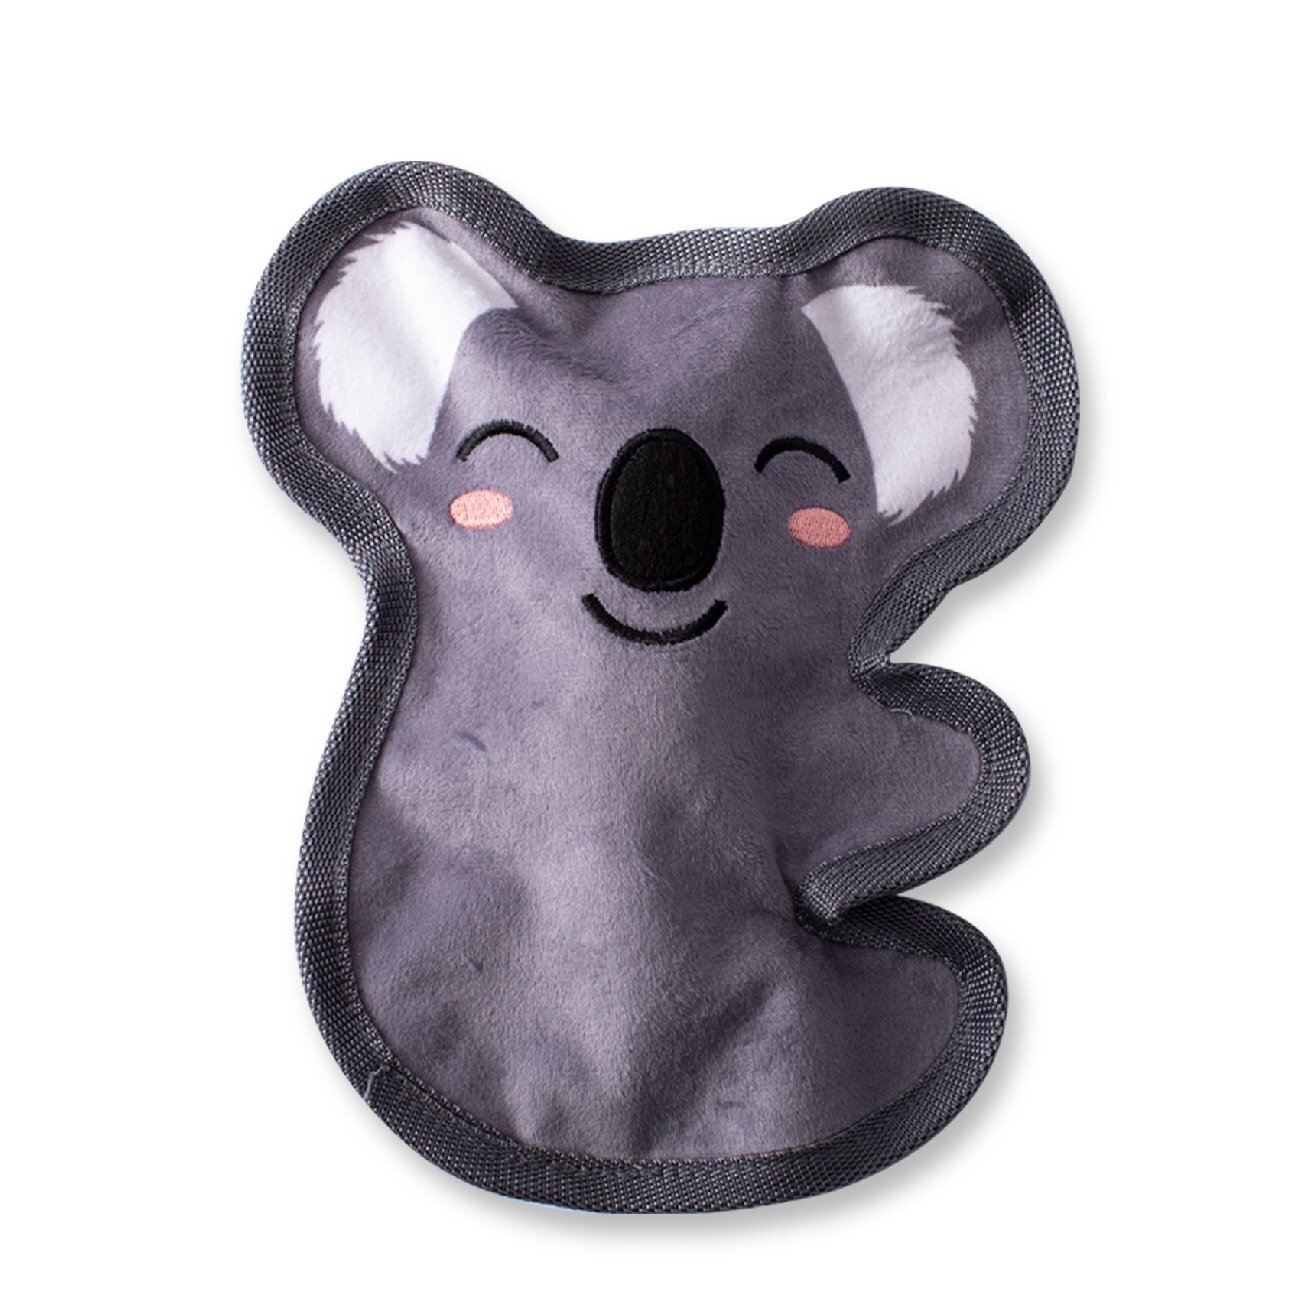 Fringe Studio PetShop Let's Have Some Koala-ty Time  |  No-Stuffing Durable Squeaky Plush Toy